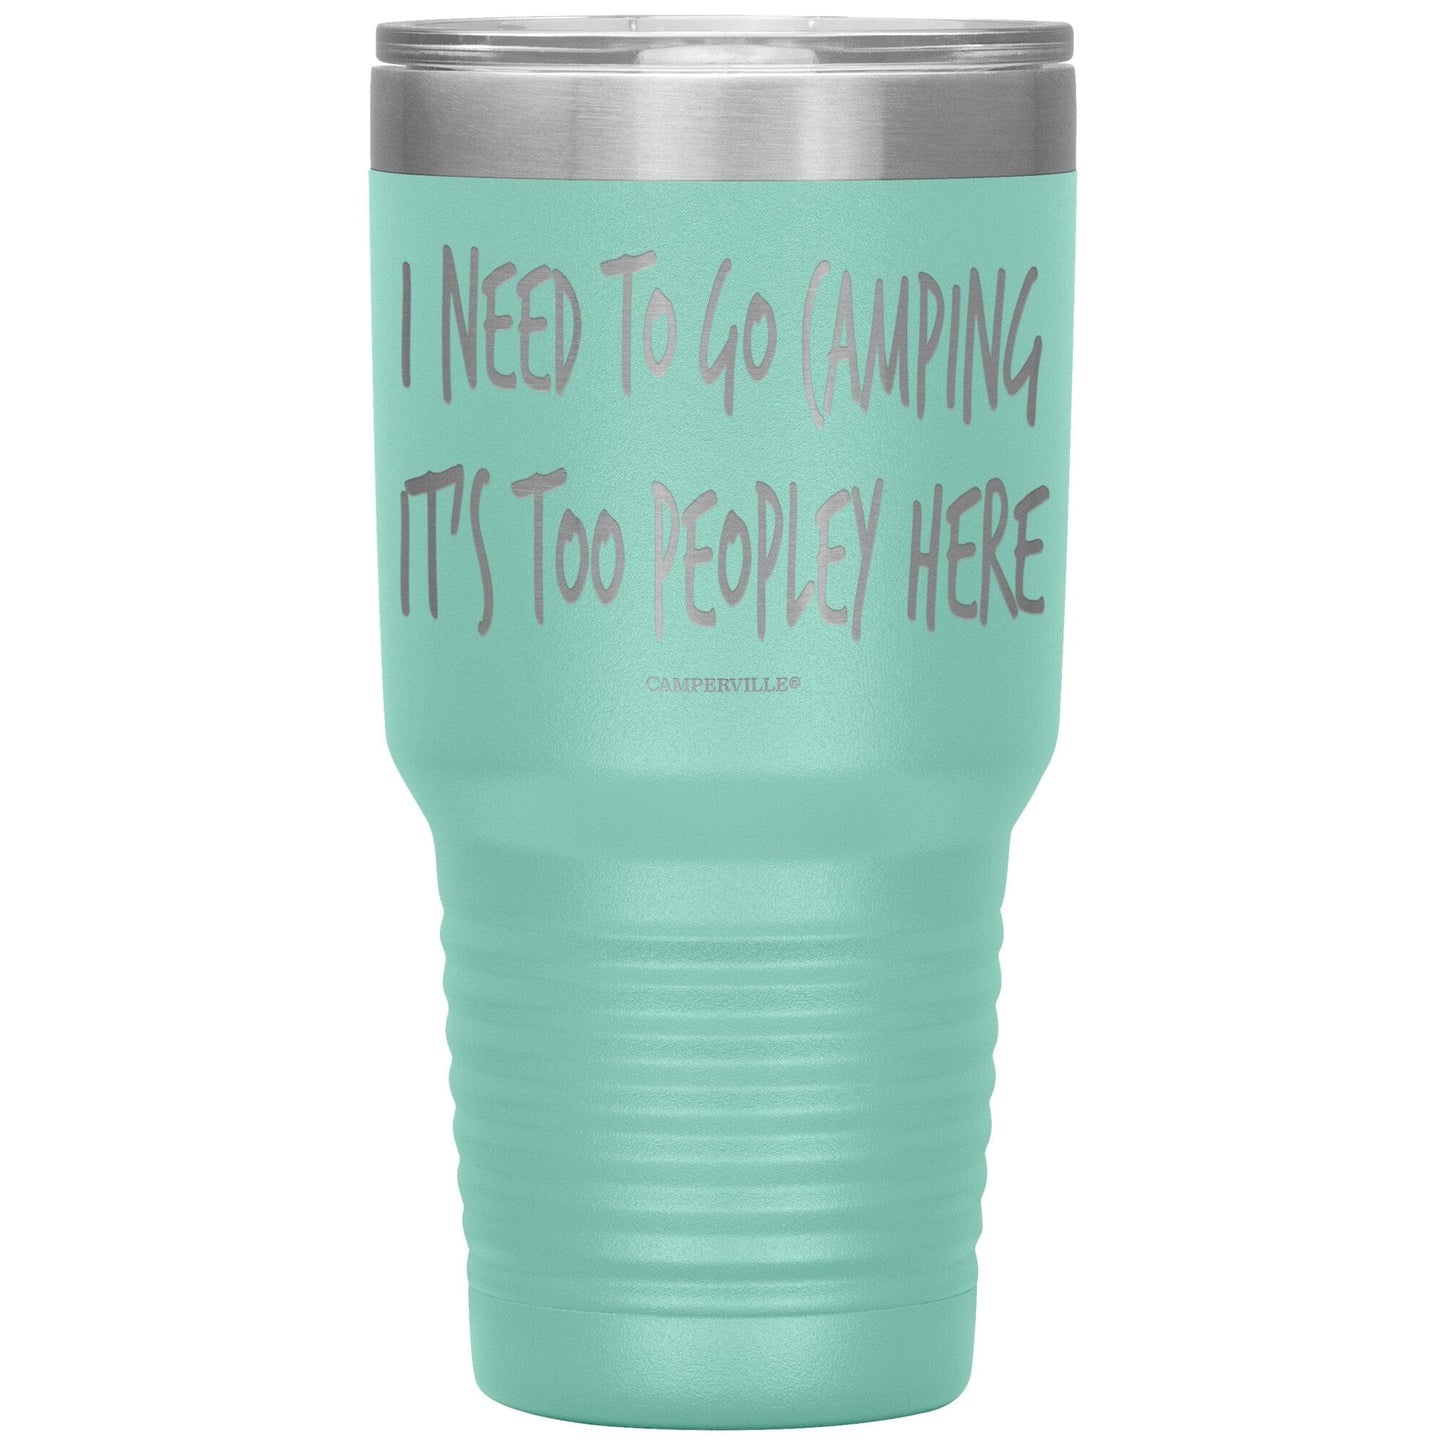 "I Need To Go Camping, It's Too Peopley Here" - Stainless Steel Tumbler